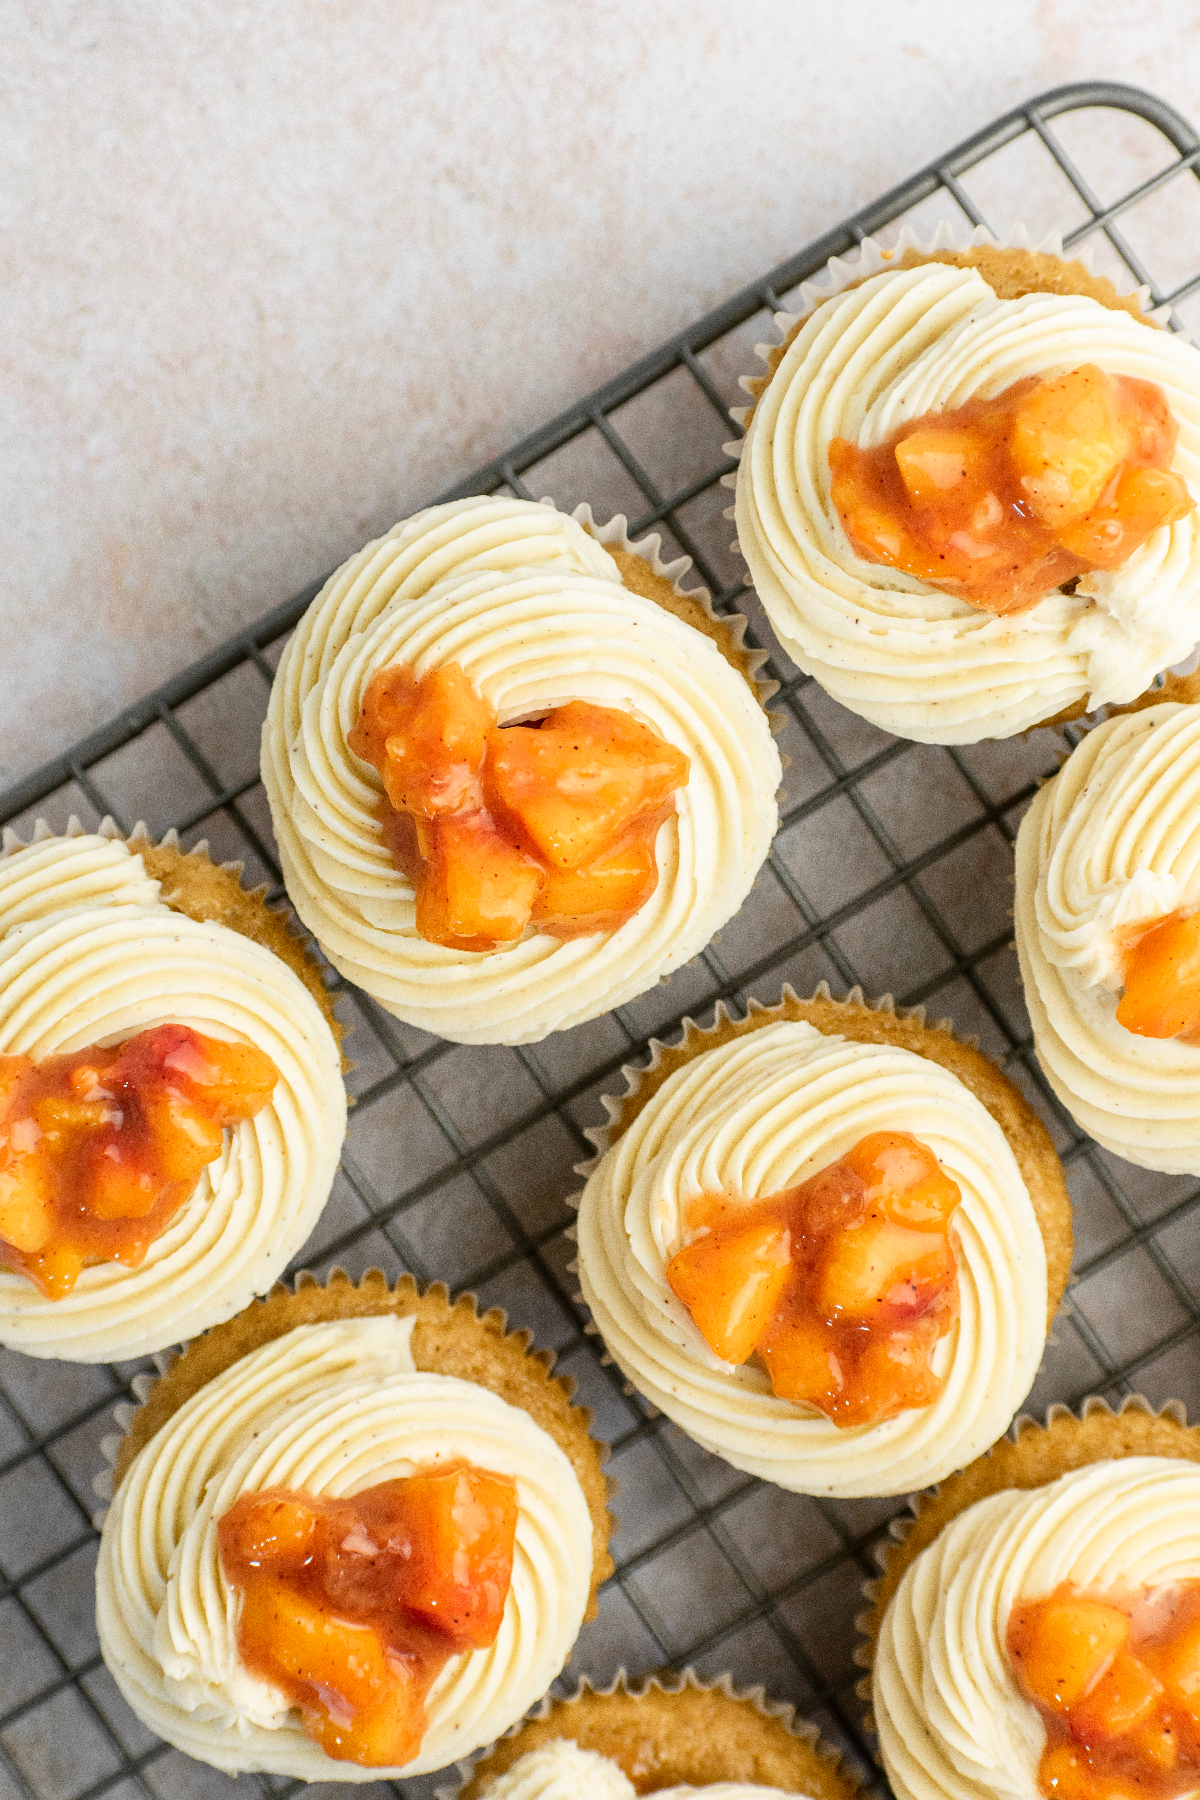 Cupcakes frosted and topped with more peaches.